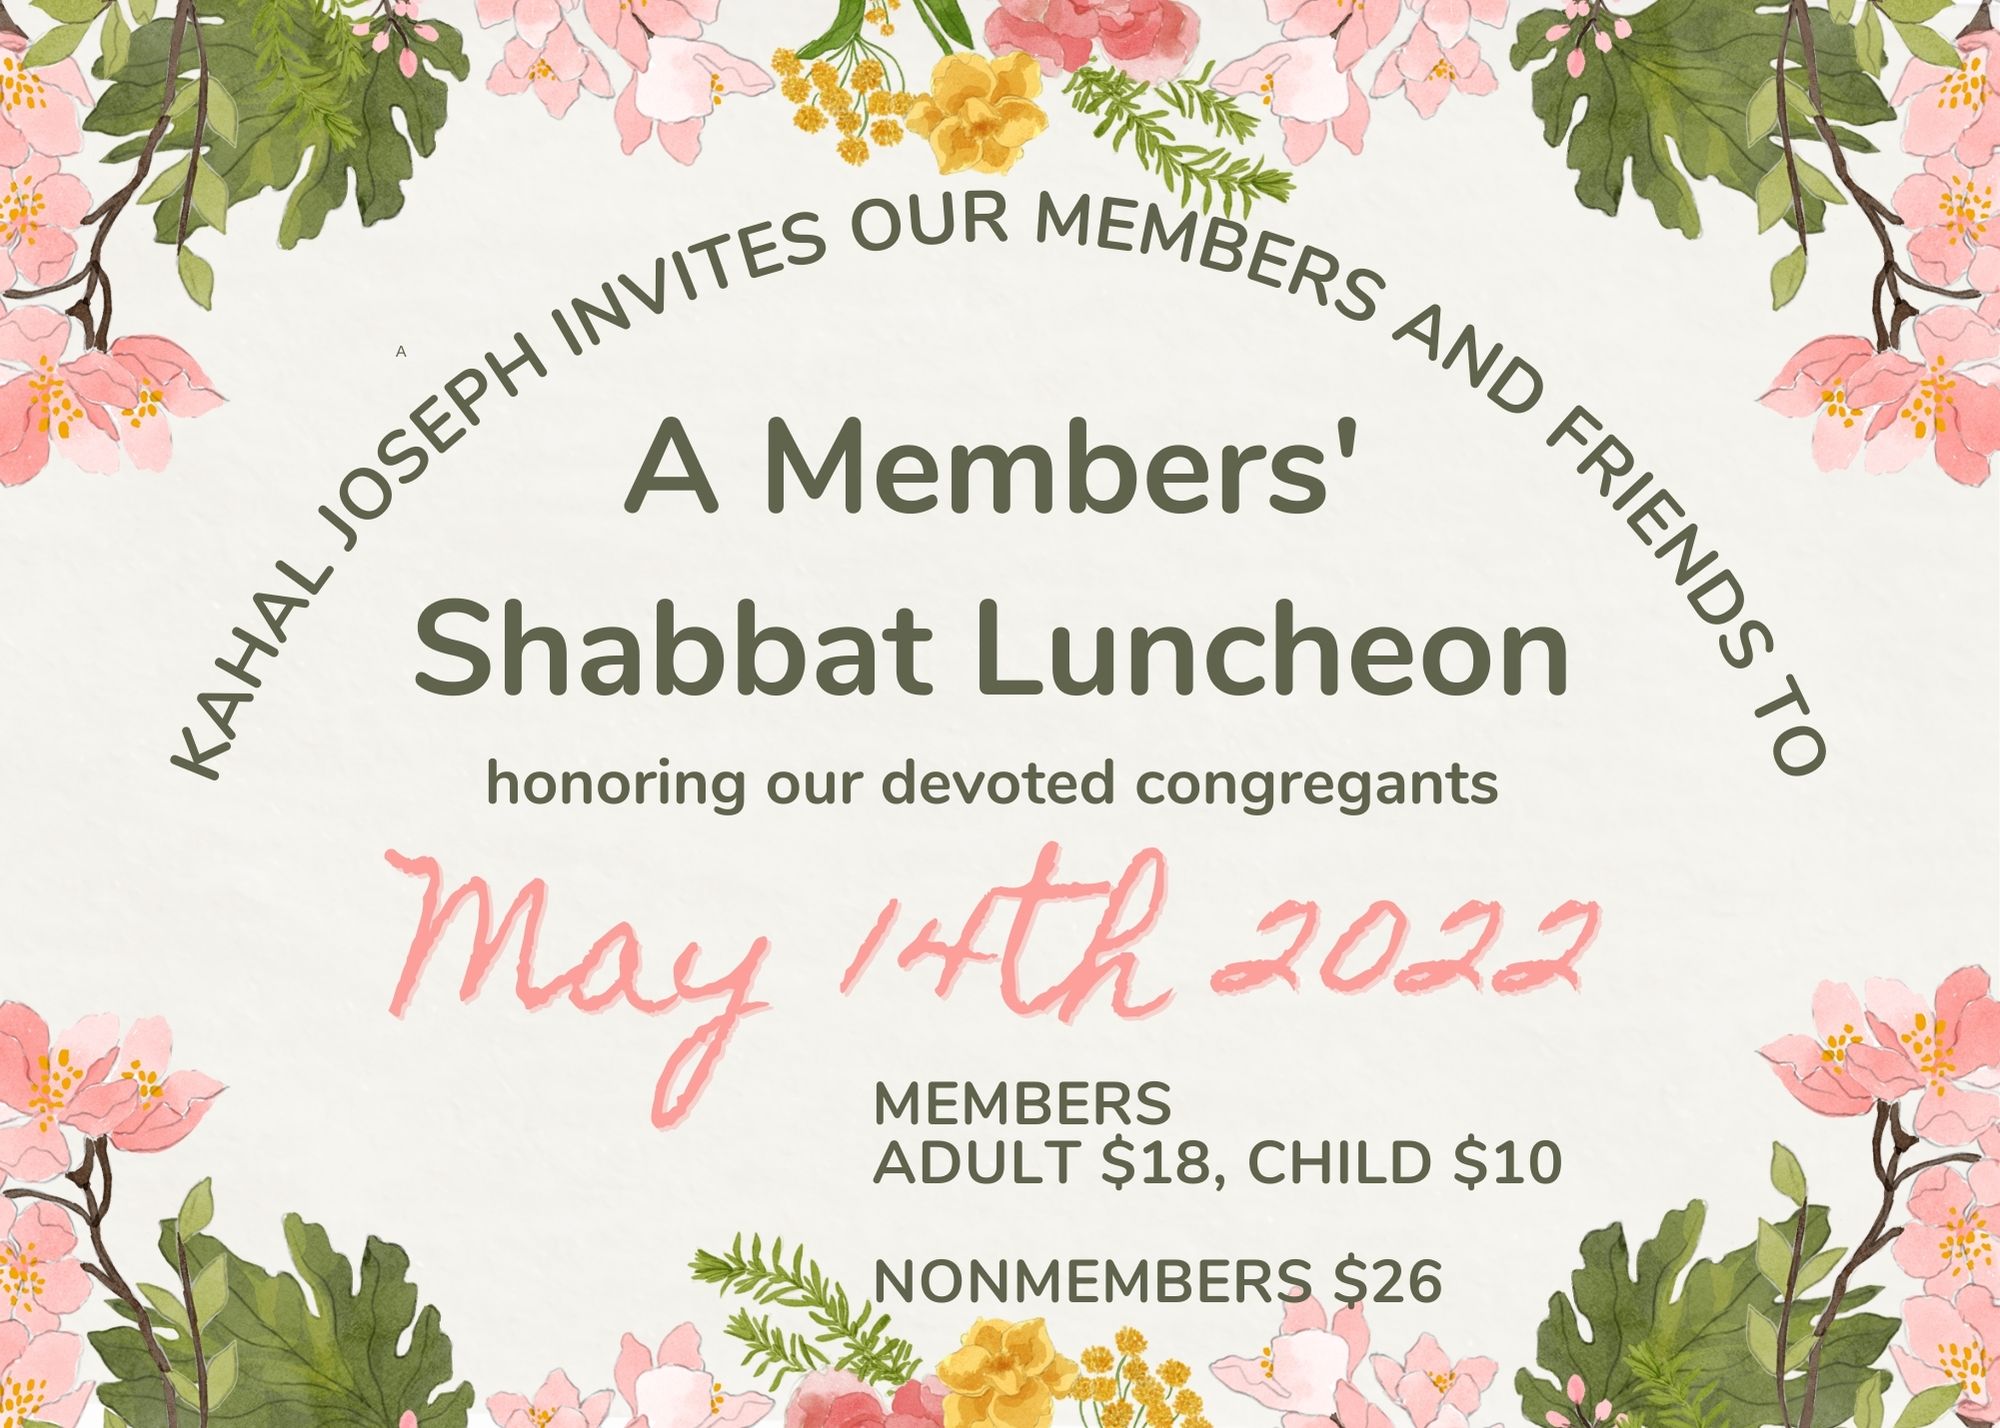 Luncheon to Honor Members